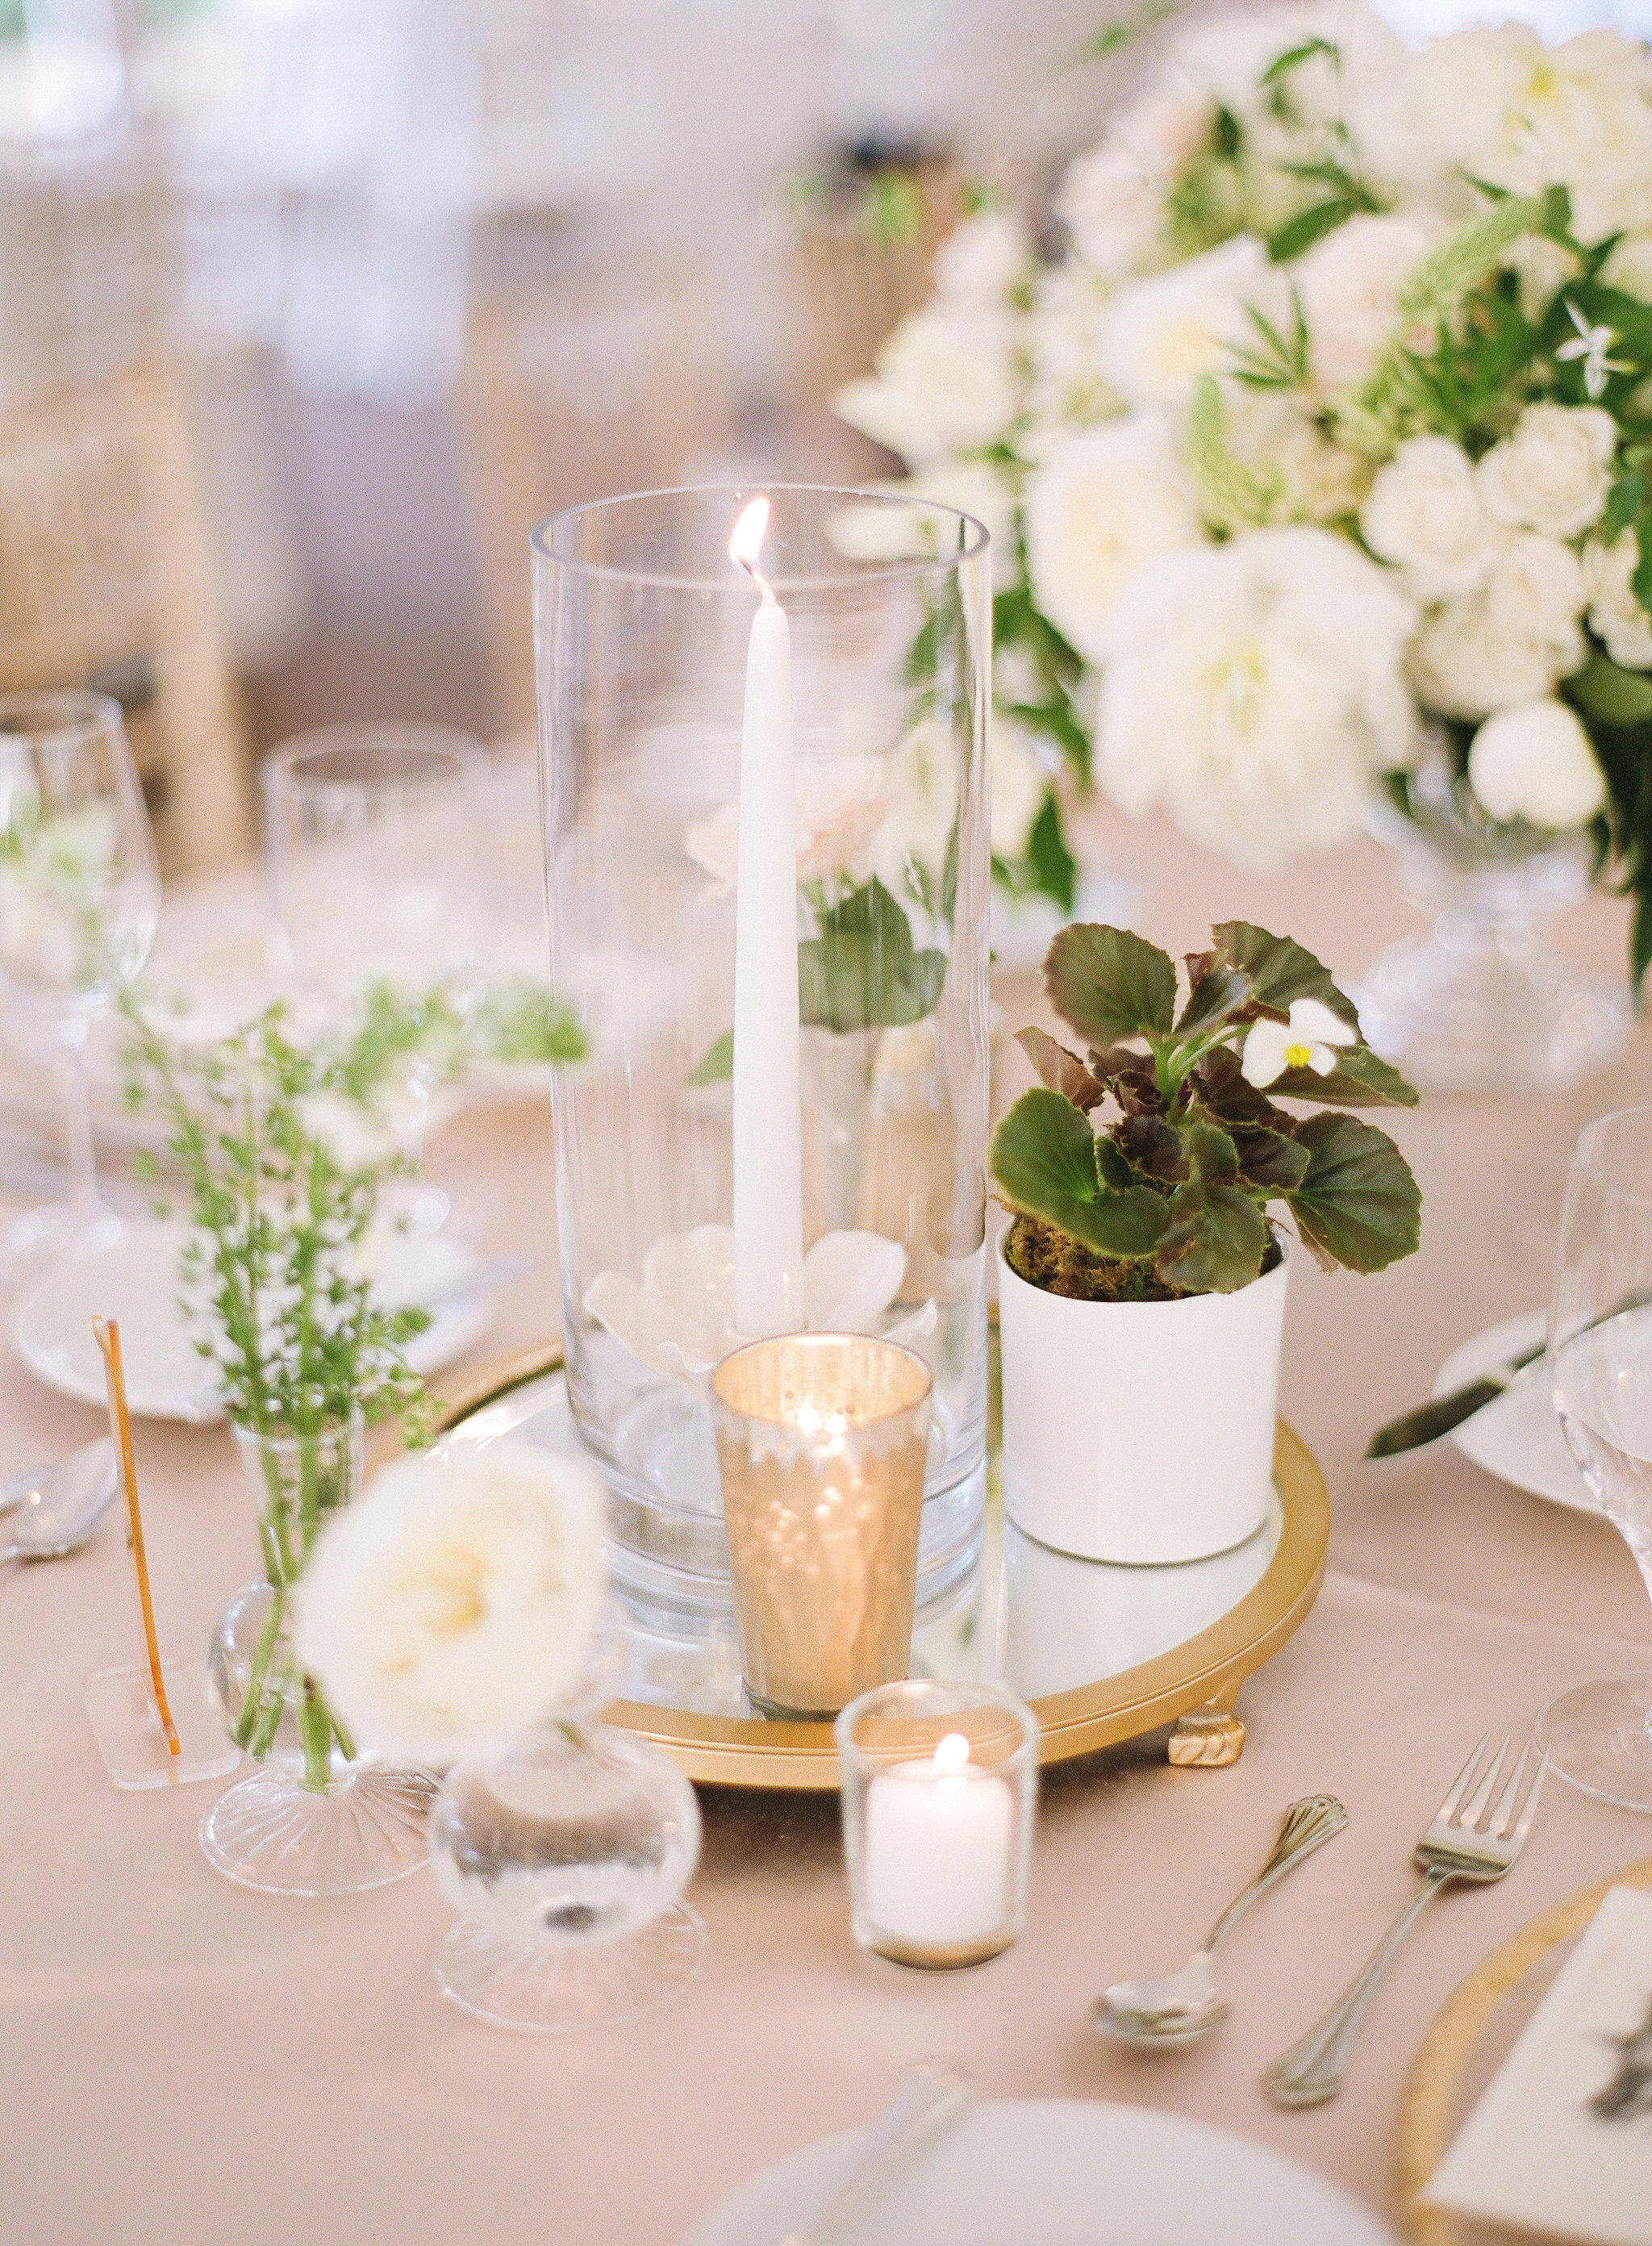 Centerpiece setting vase with glass frog and candle holders